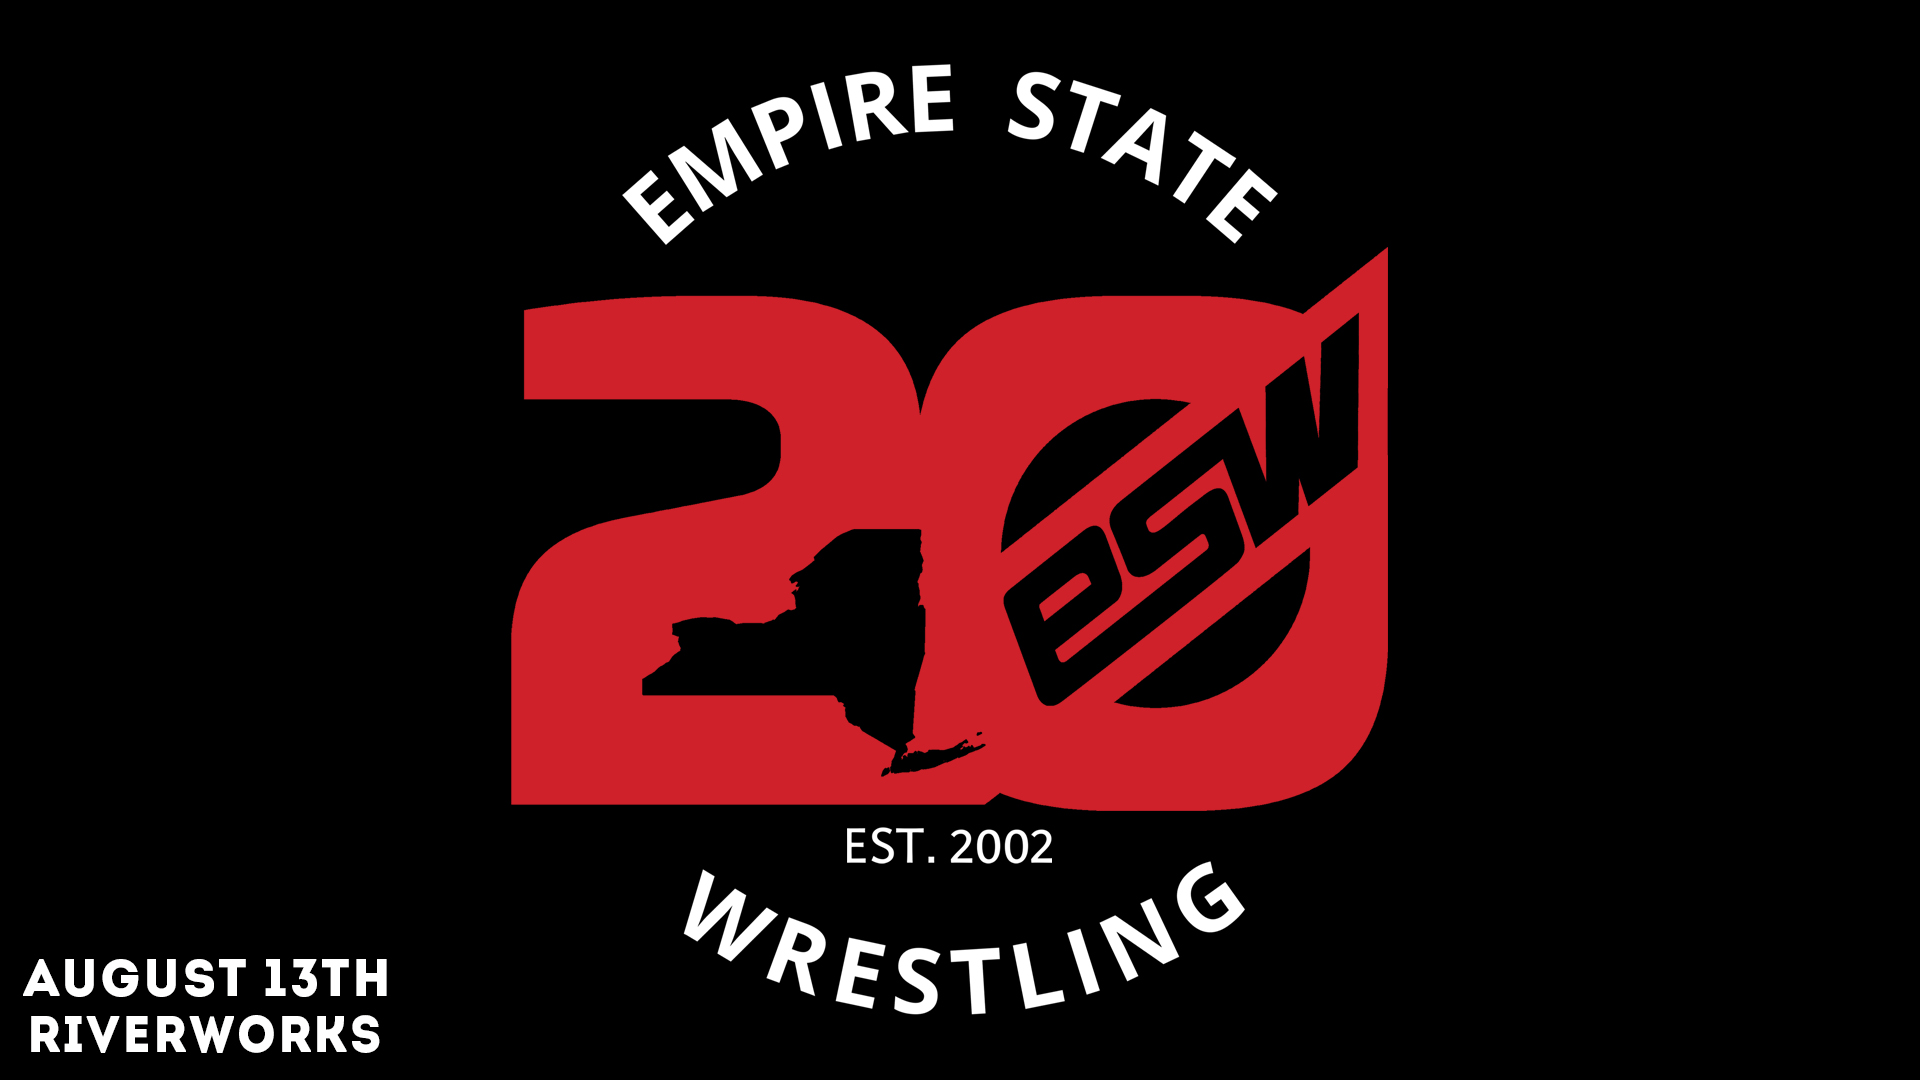 Graphic courtesy of Empire State Wrestling